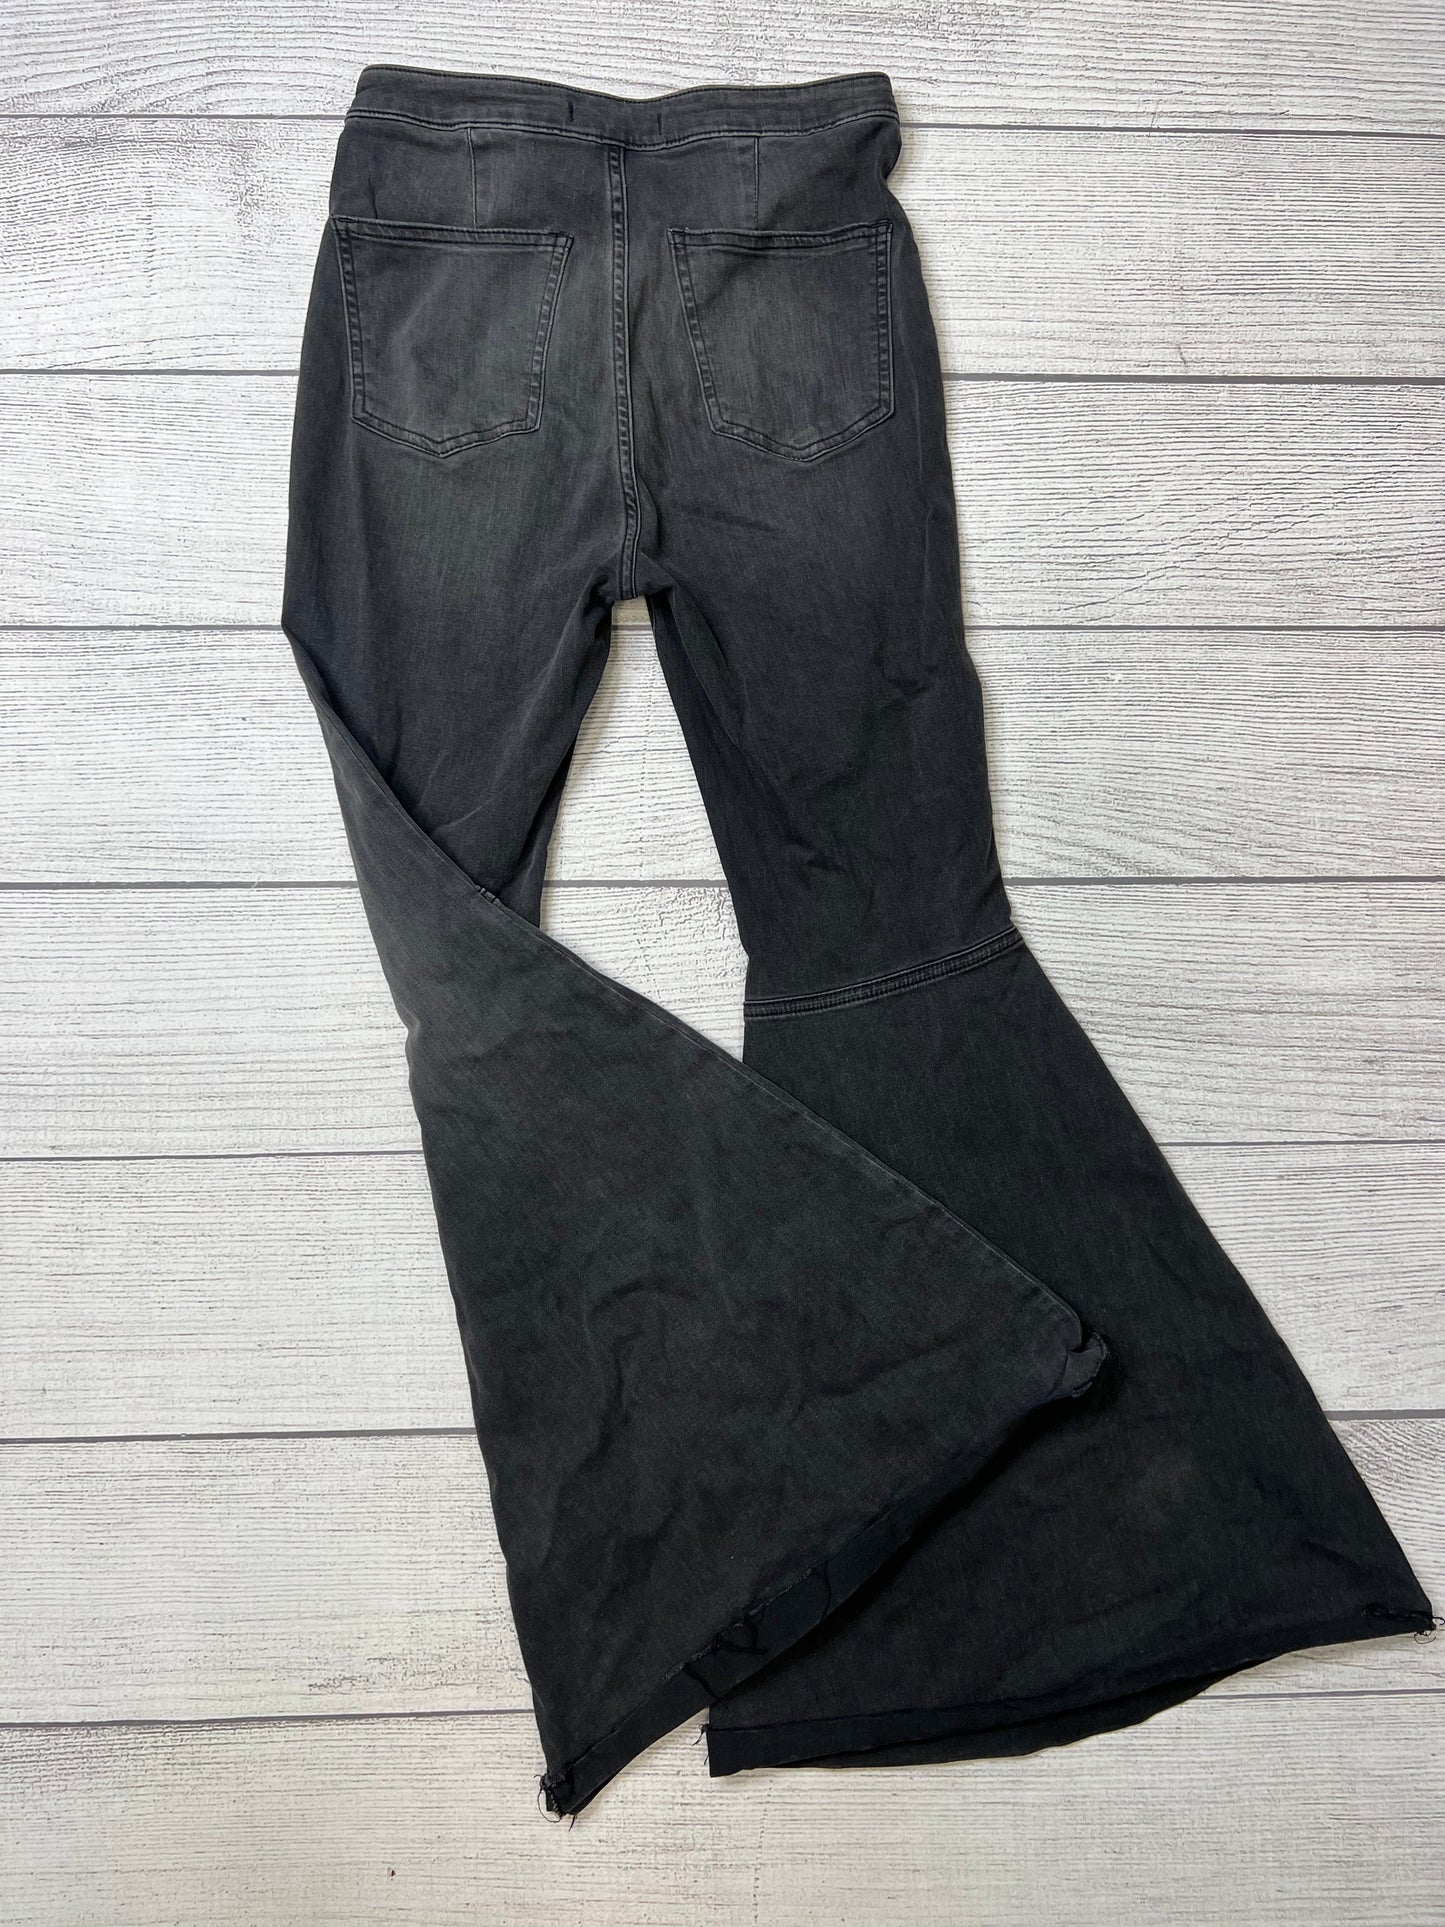 Black Jeans Flared Free People, Size 8